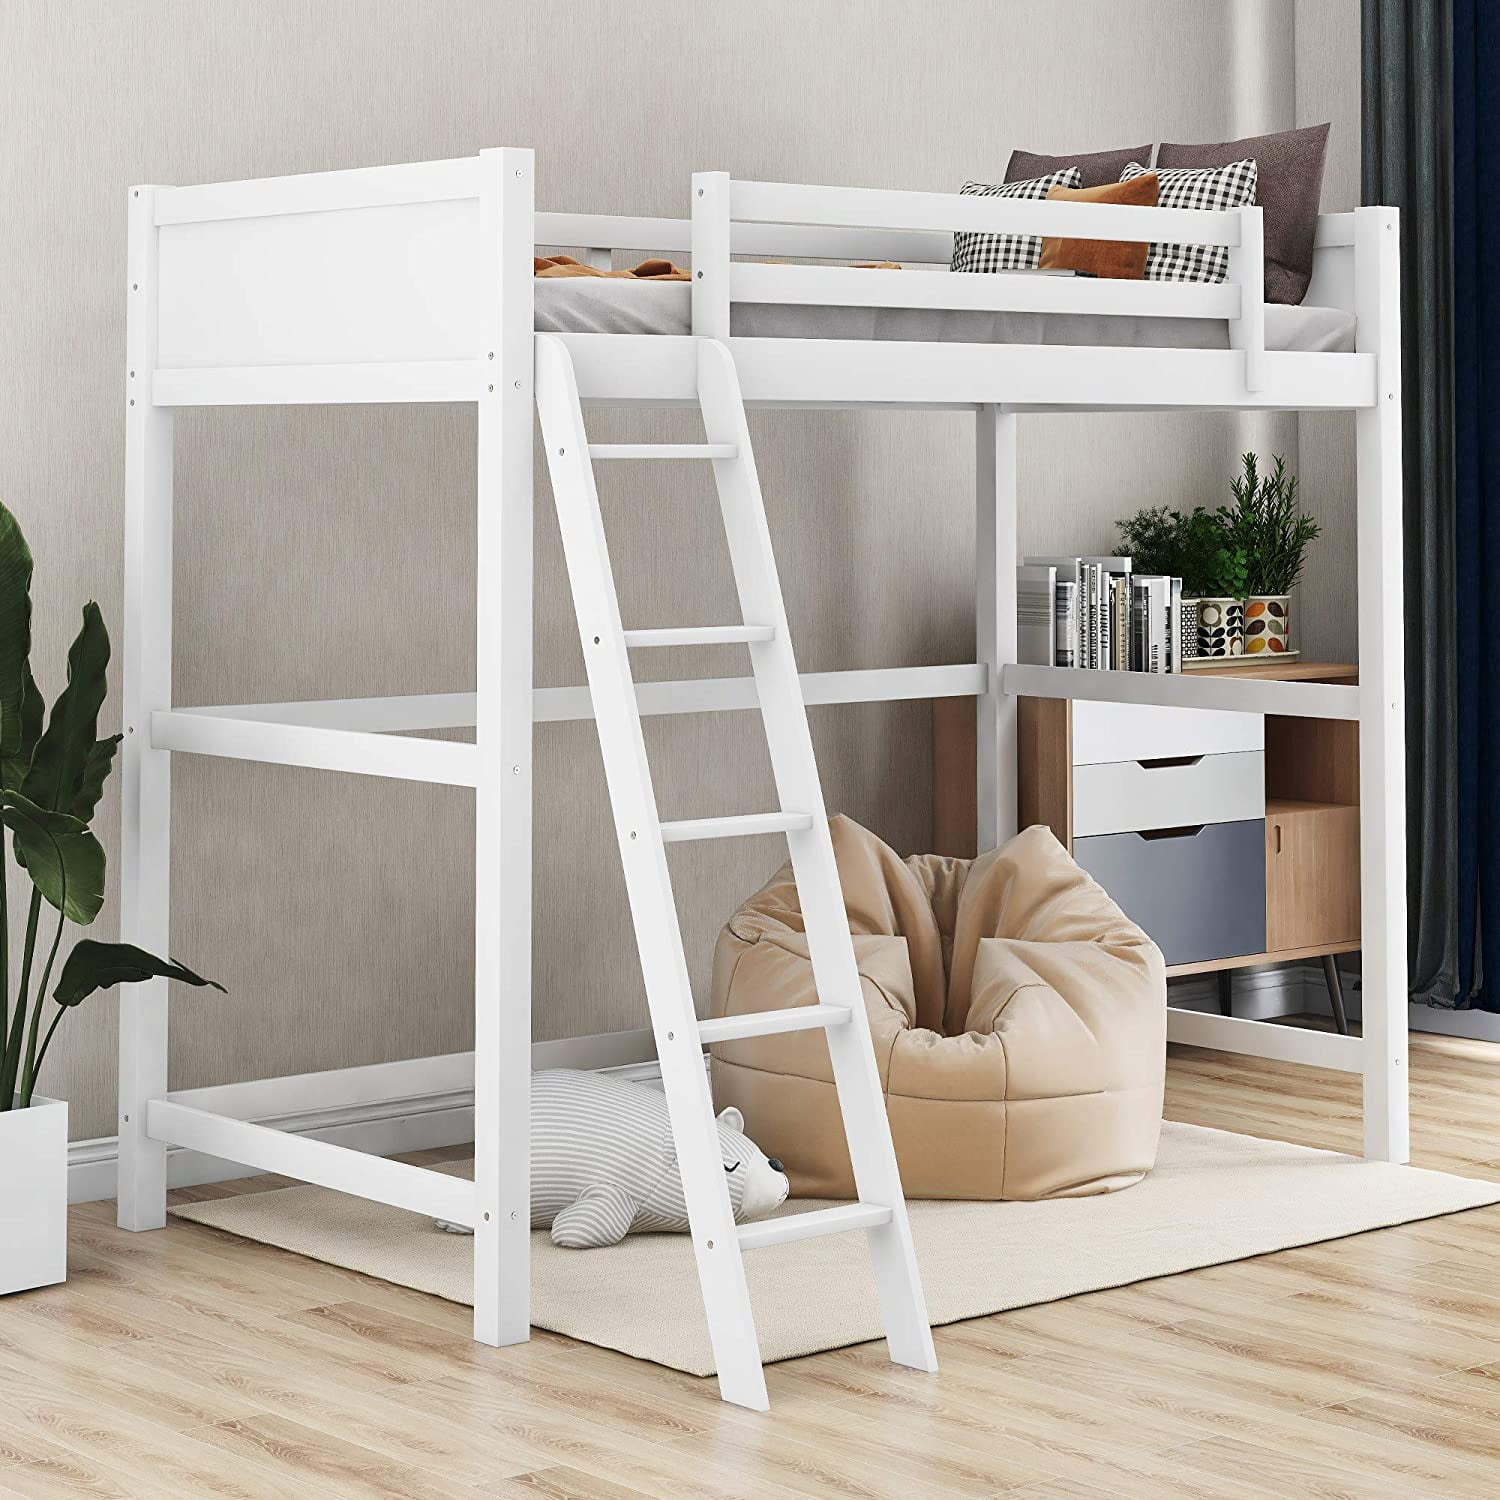 Churanty Twin Size Loft Bed With Ladder, Full Size Loft Bed Frame Wood